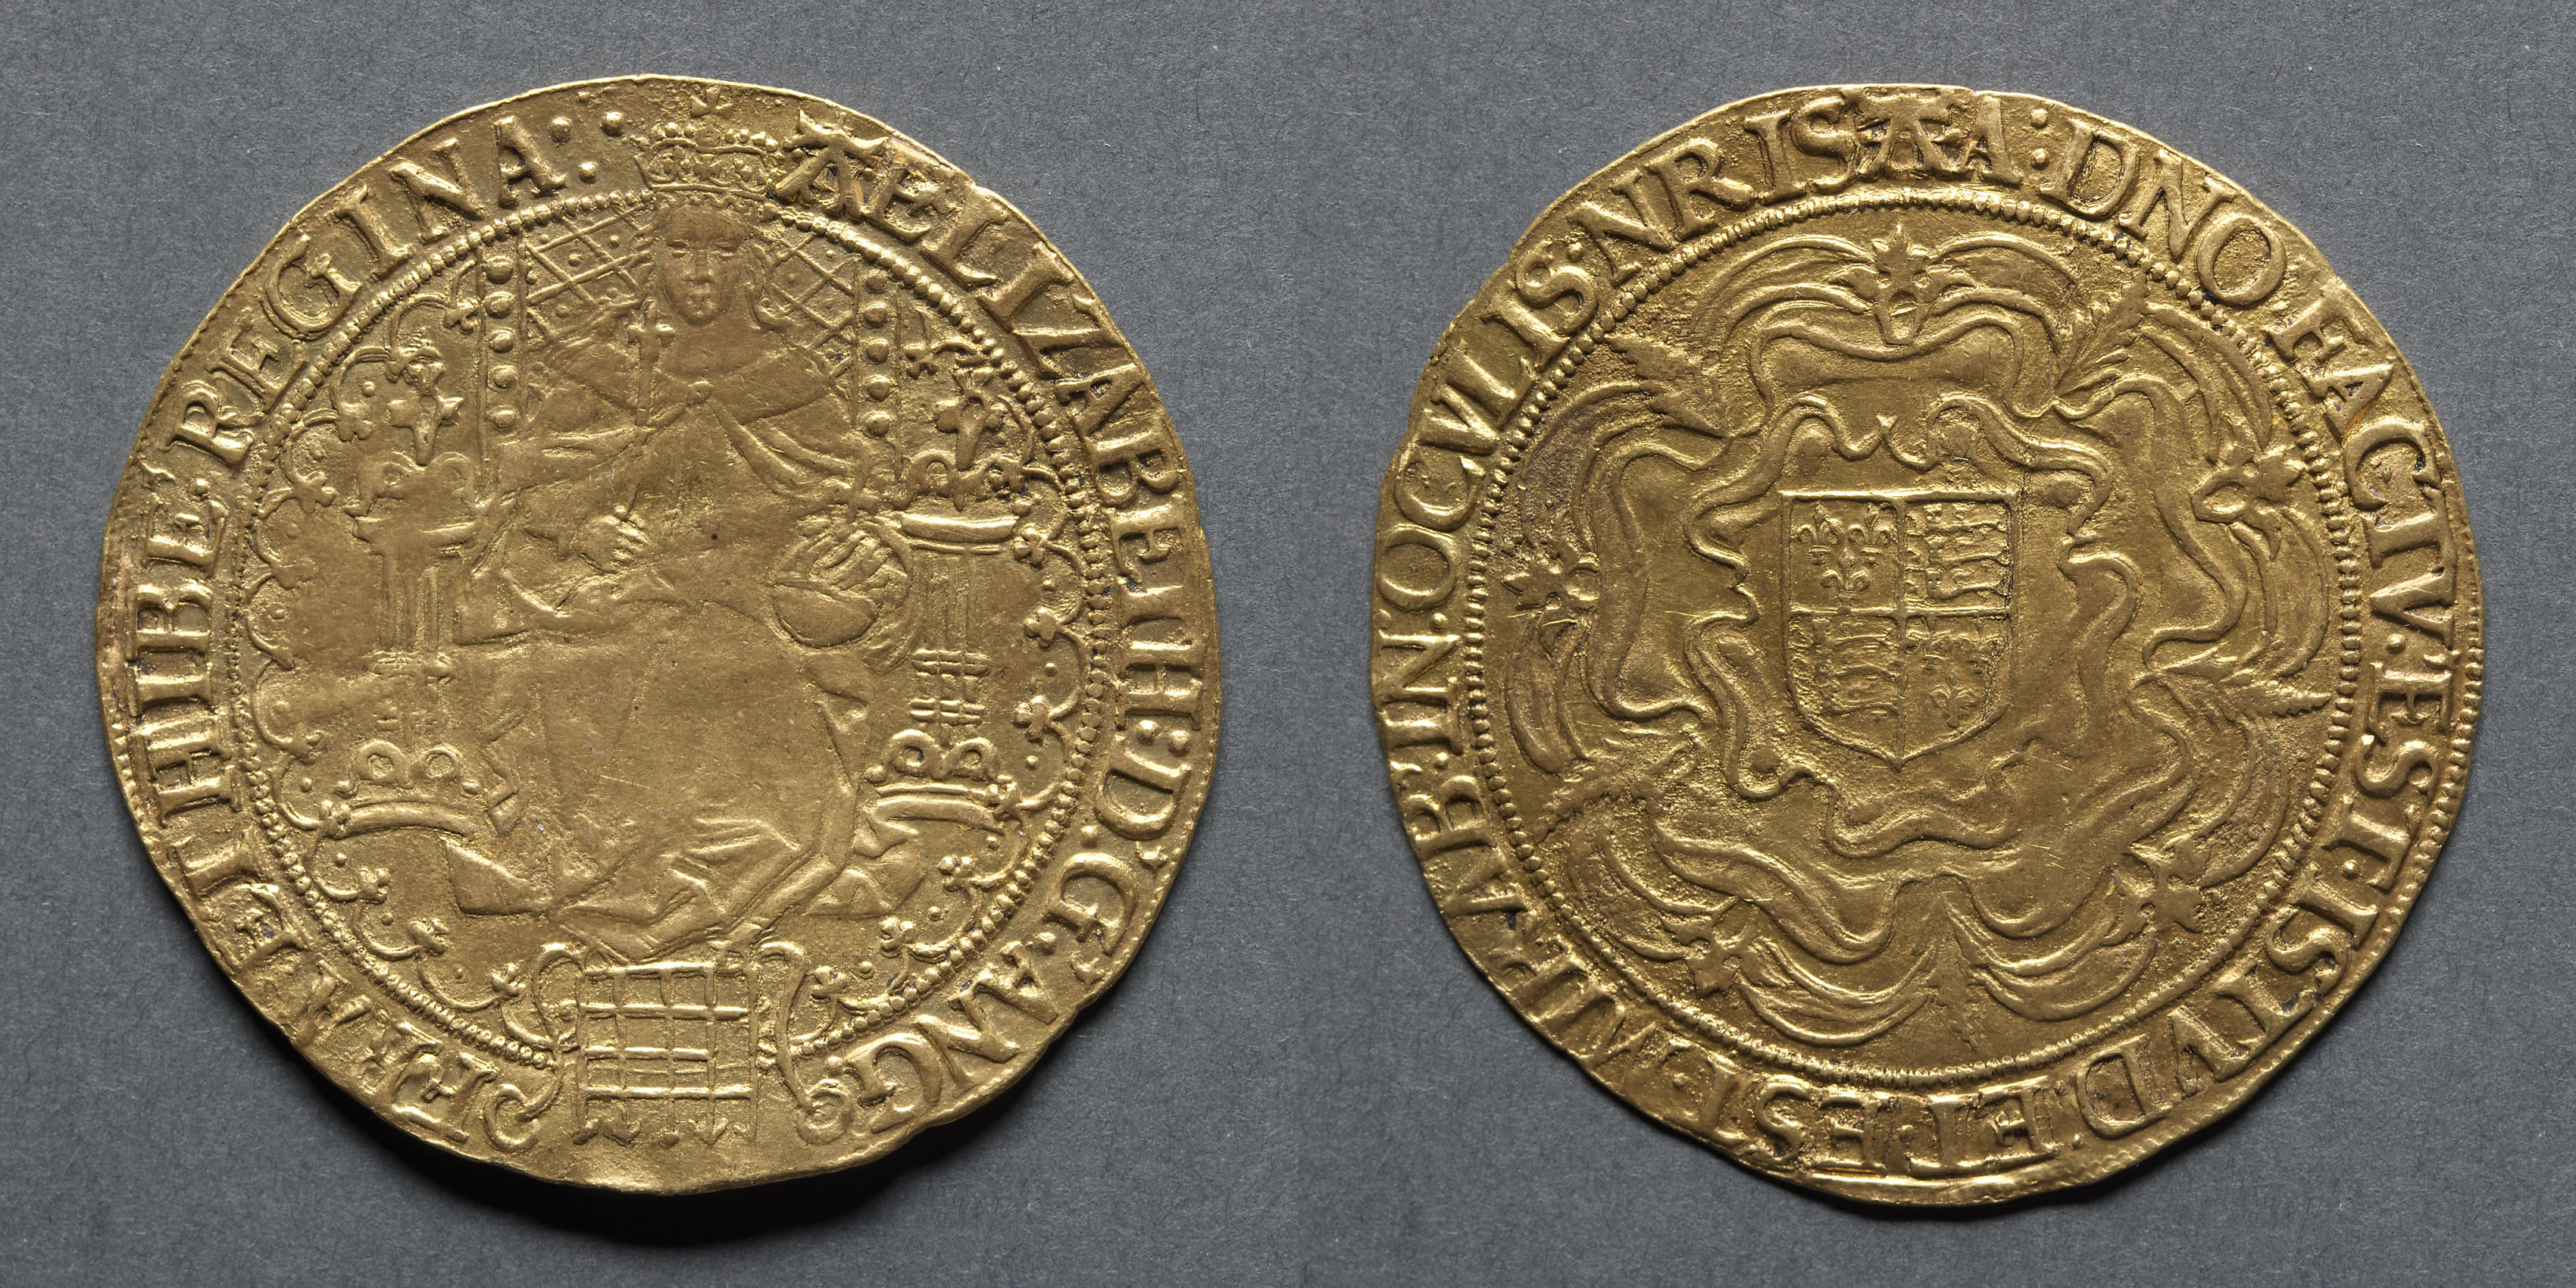 Sovereign of Thirty Shillings: Elizabeth I (obverse); Shield of Arms on Tudor Rose (reverse)